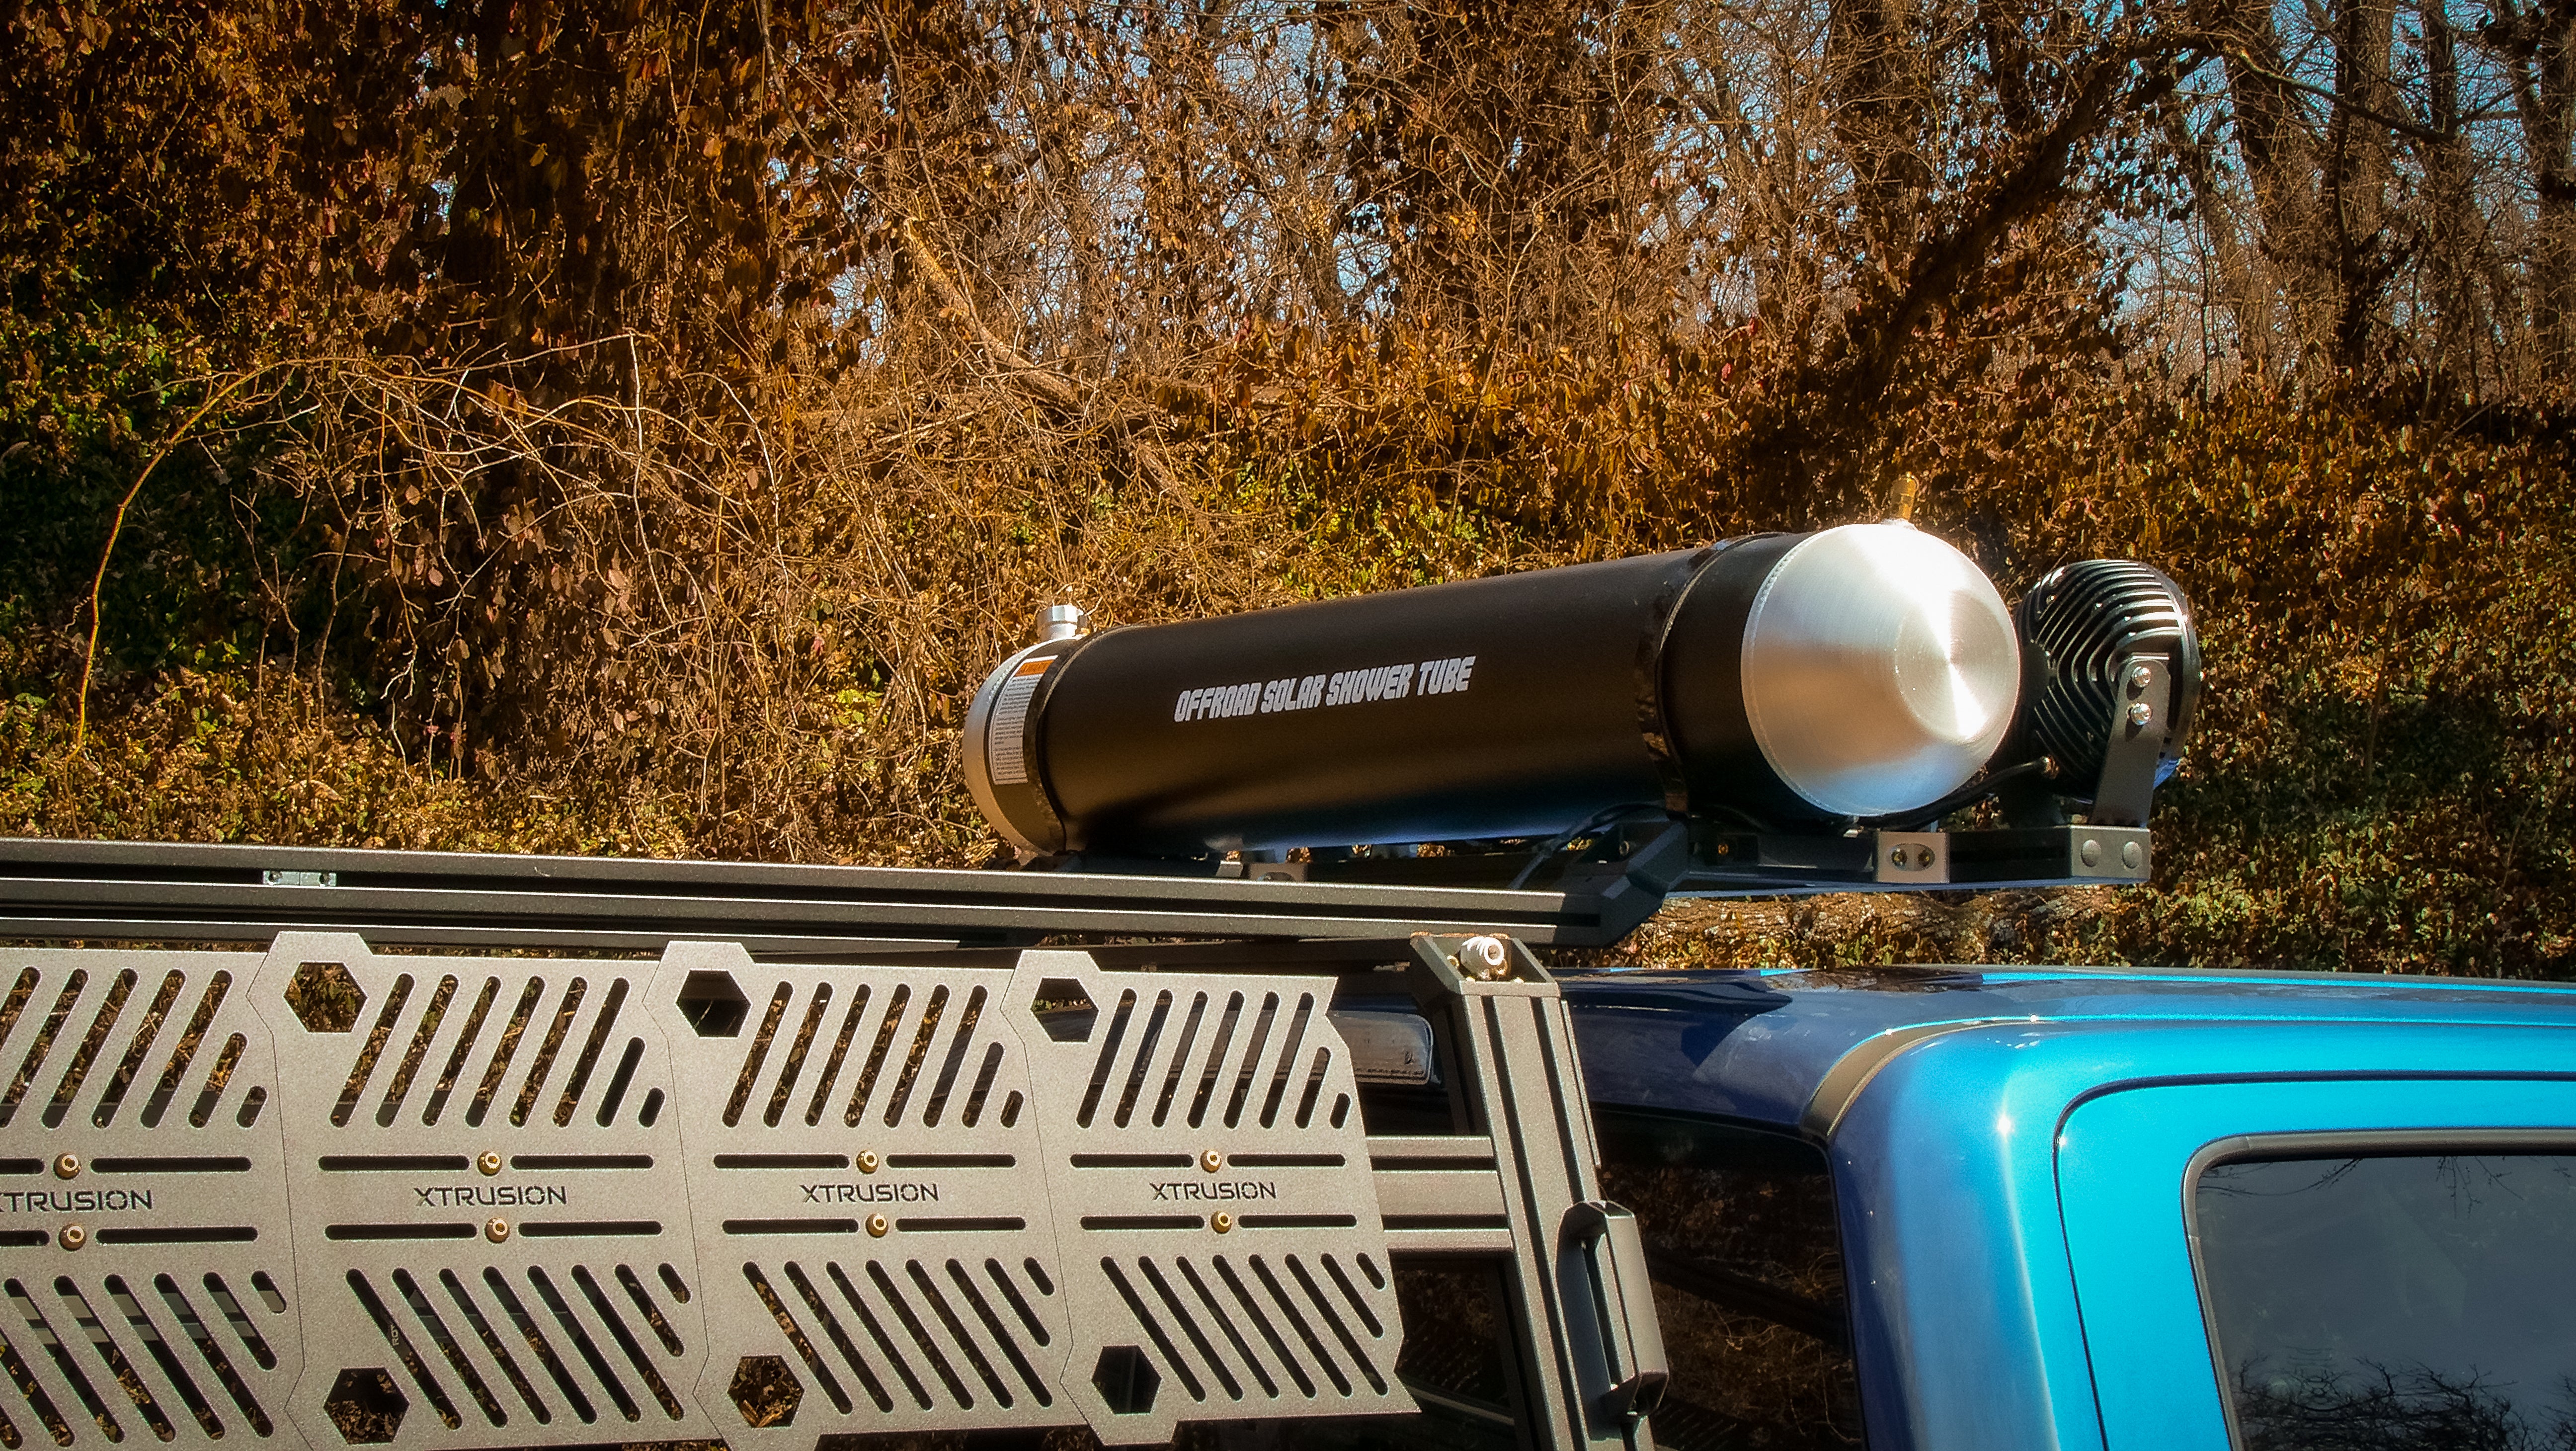 Off-Road Solar Shower Tanks "The Missile"